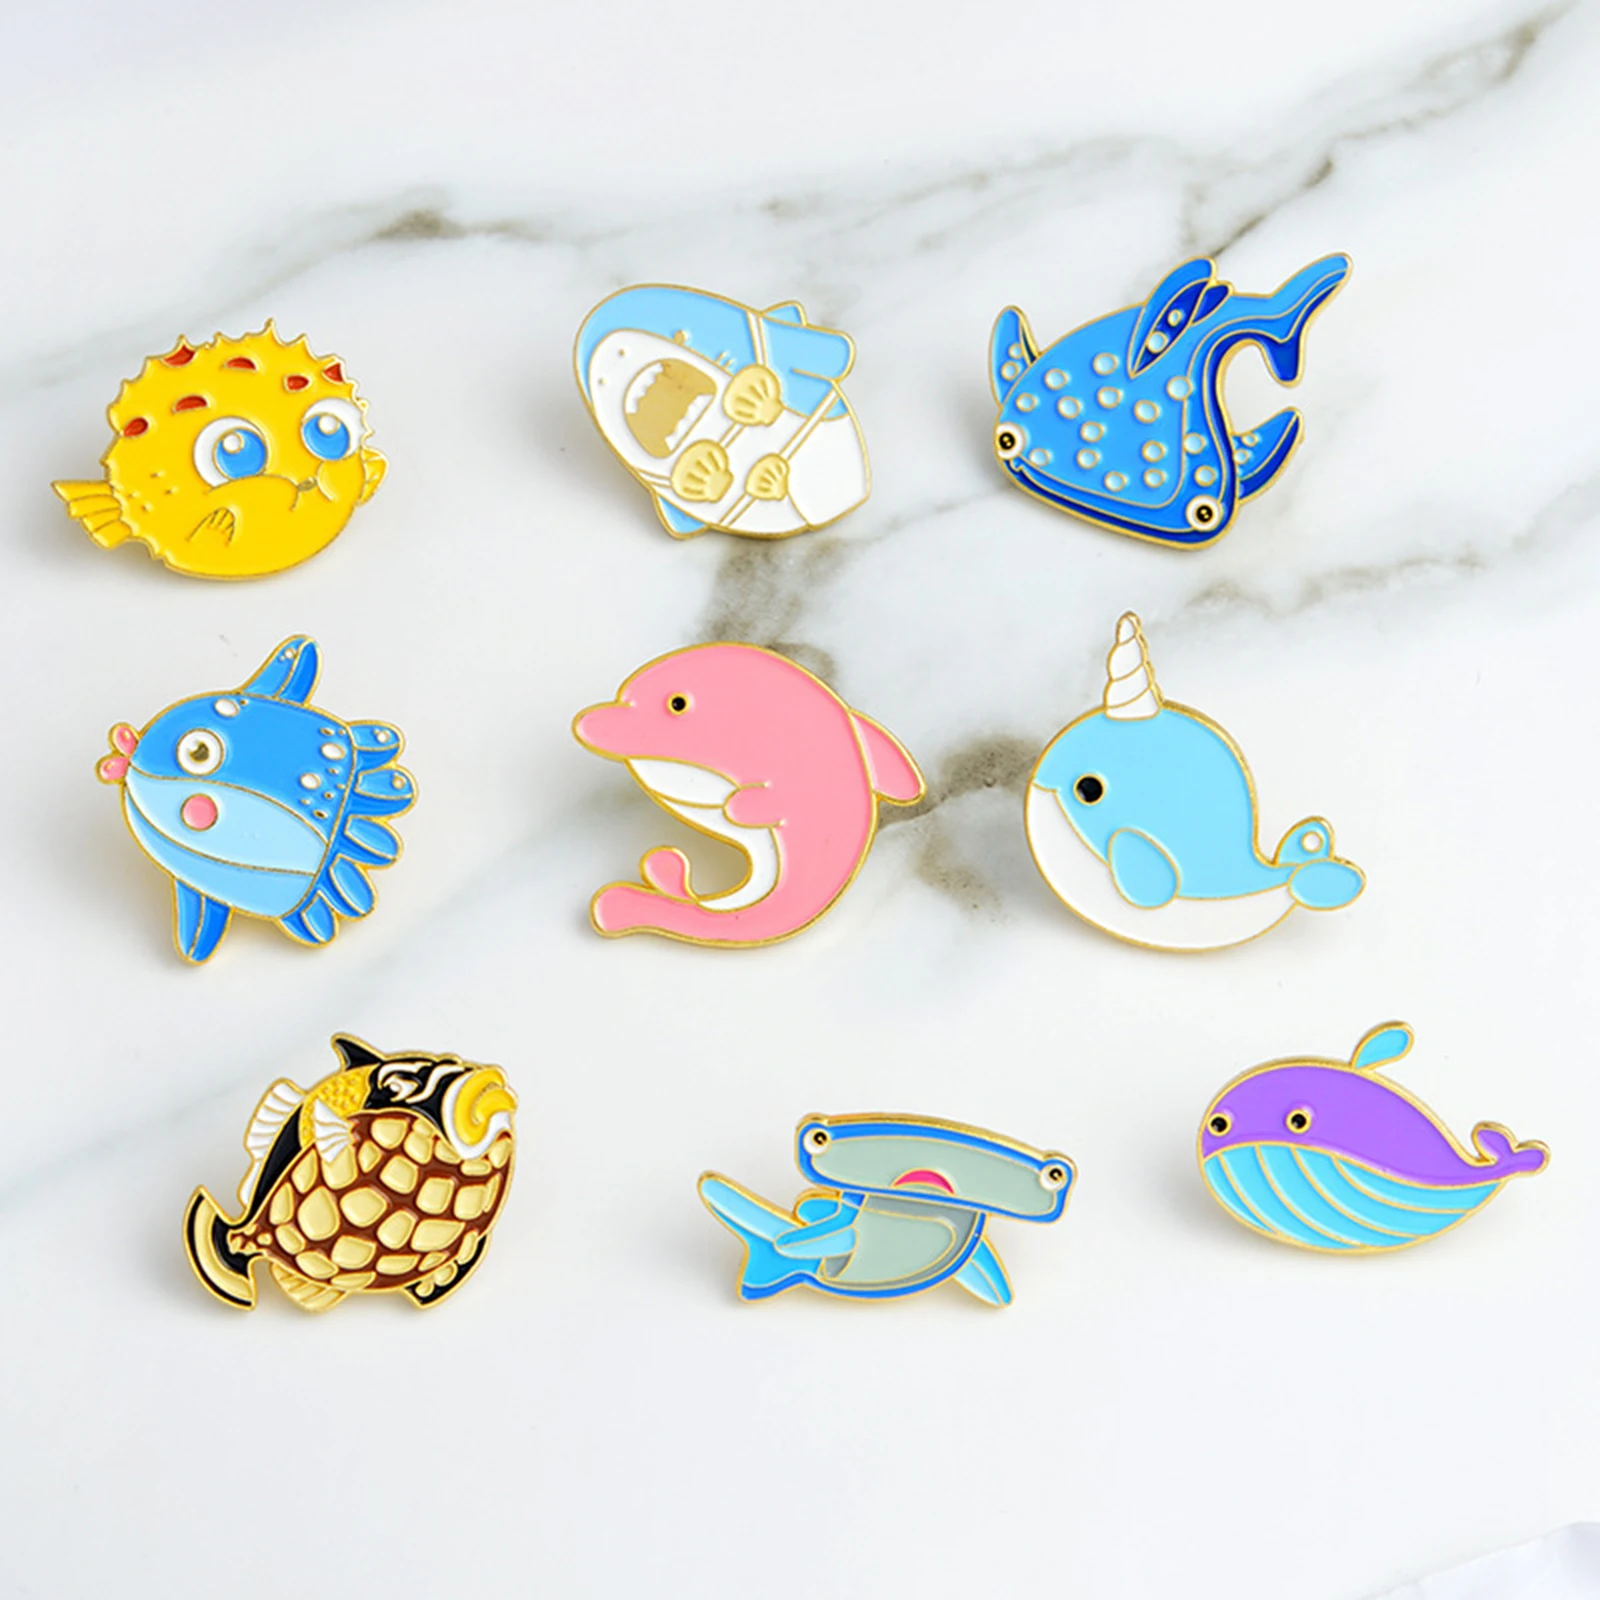 

Ocean Enamel Pins Brooches Cute Whale Dolphin Animal Brooches Lapel Pin Shirt Bag Deep Sea Badge Freedom Jewelry Gift for Friend